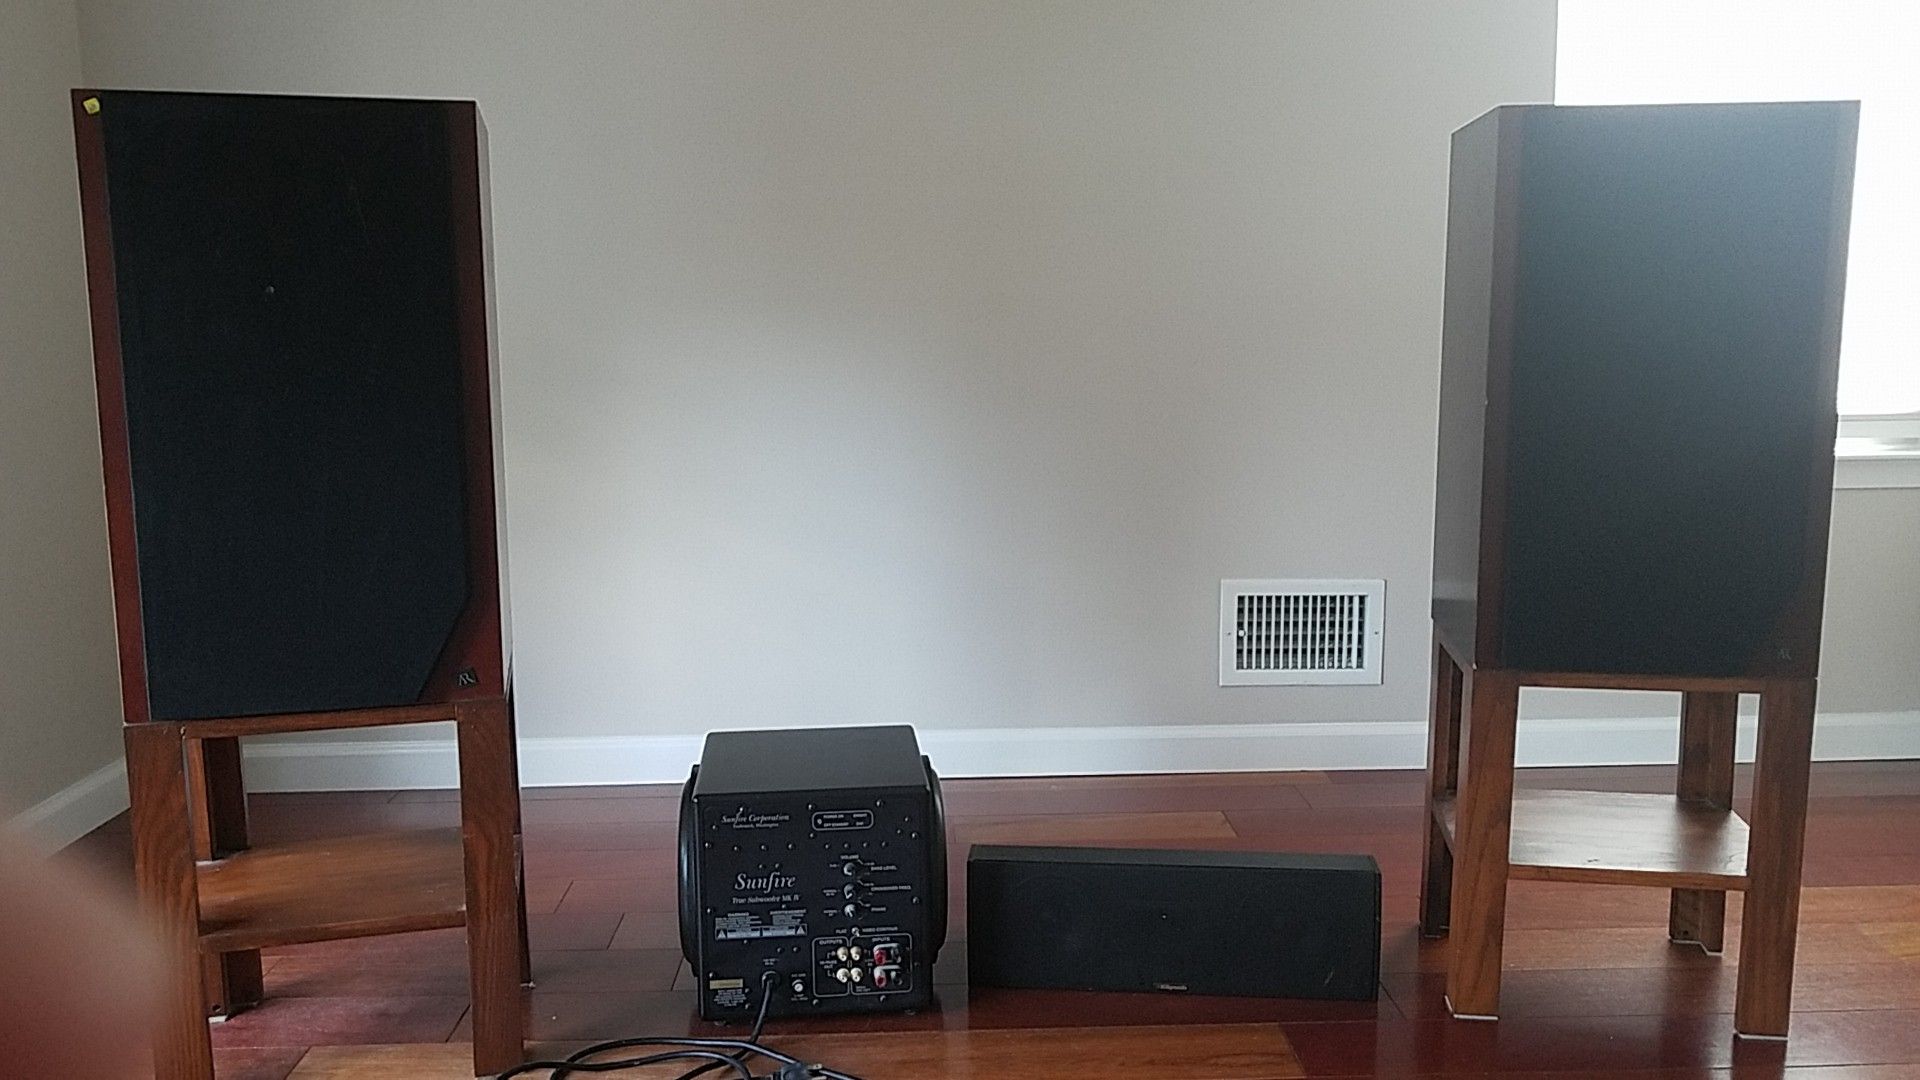 Acoustic Research speakers and Sunfire subwoofer